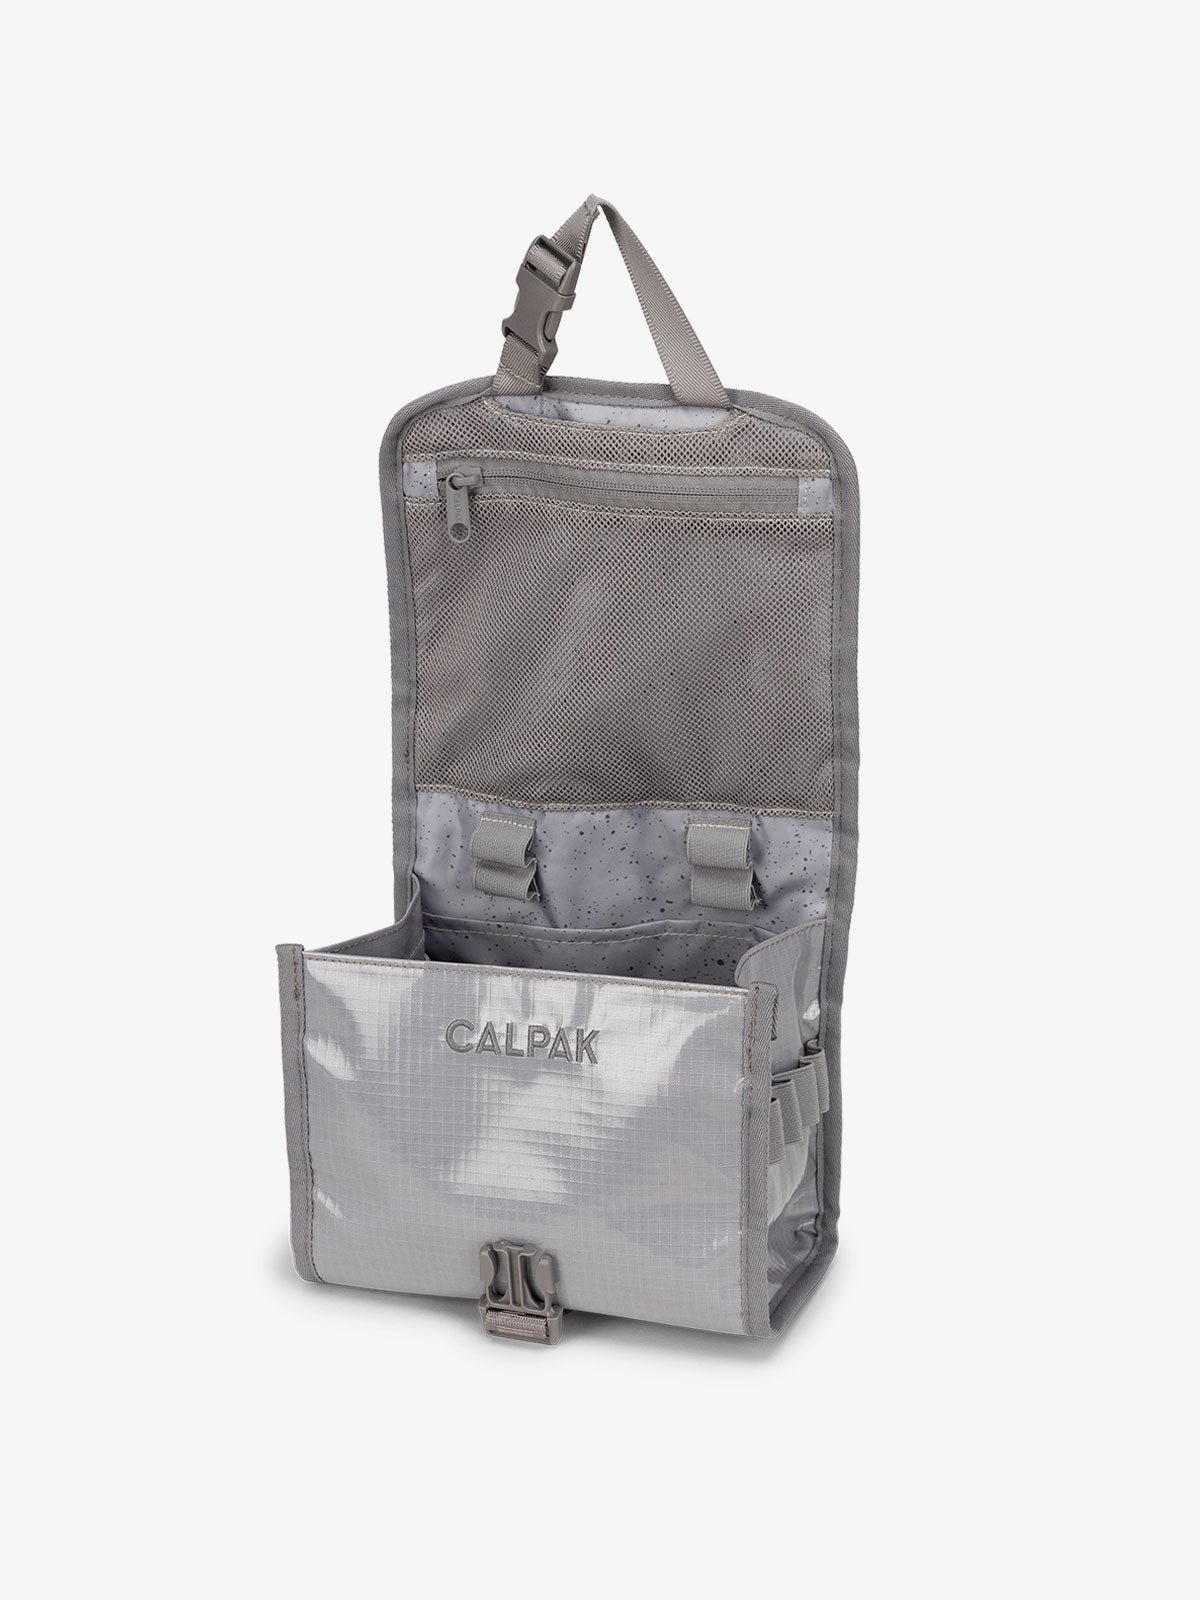 CALPAK Terra Hanging Travel Toiletry Bag for women with buckle closure, hanging hook and multiple compartments in gray